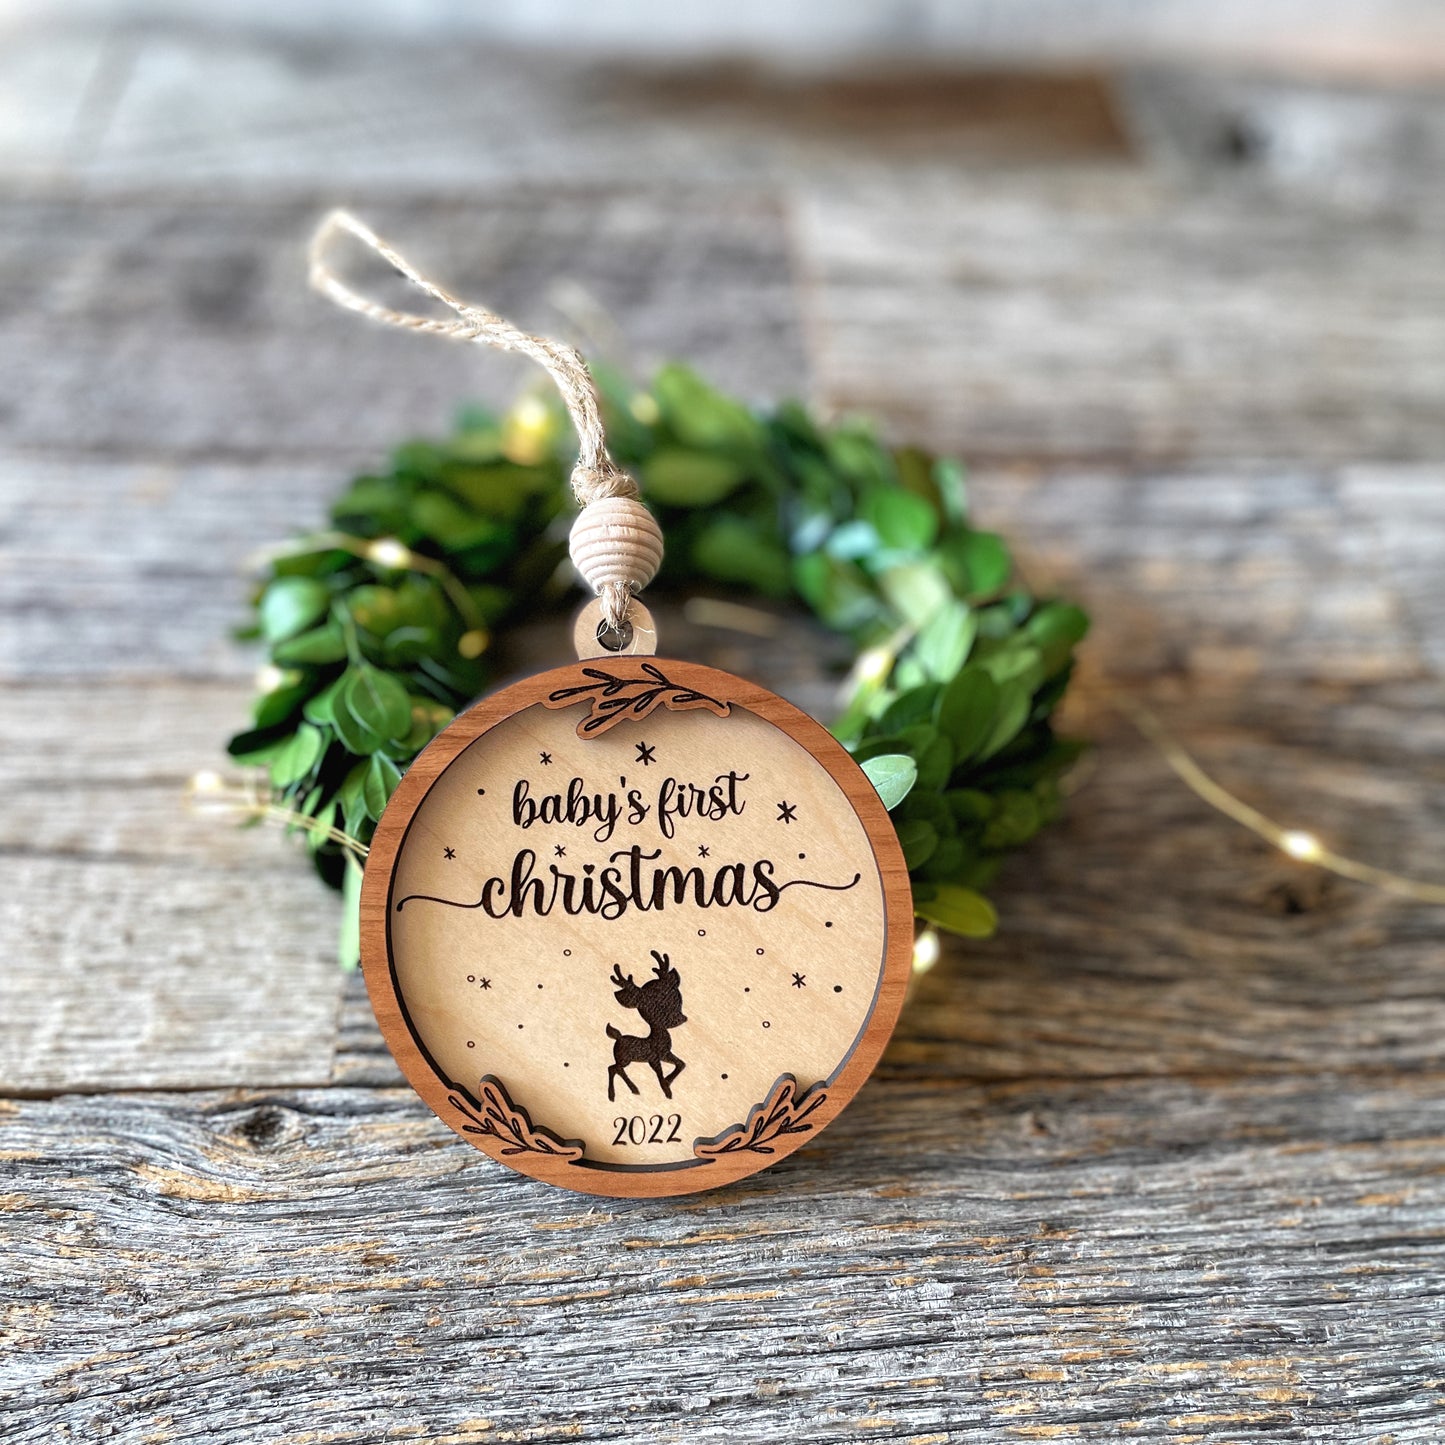 Baby's First Christmas with reindeer wood ornament, laser cut, personalized, Christmas ornament